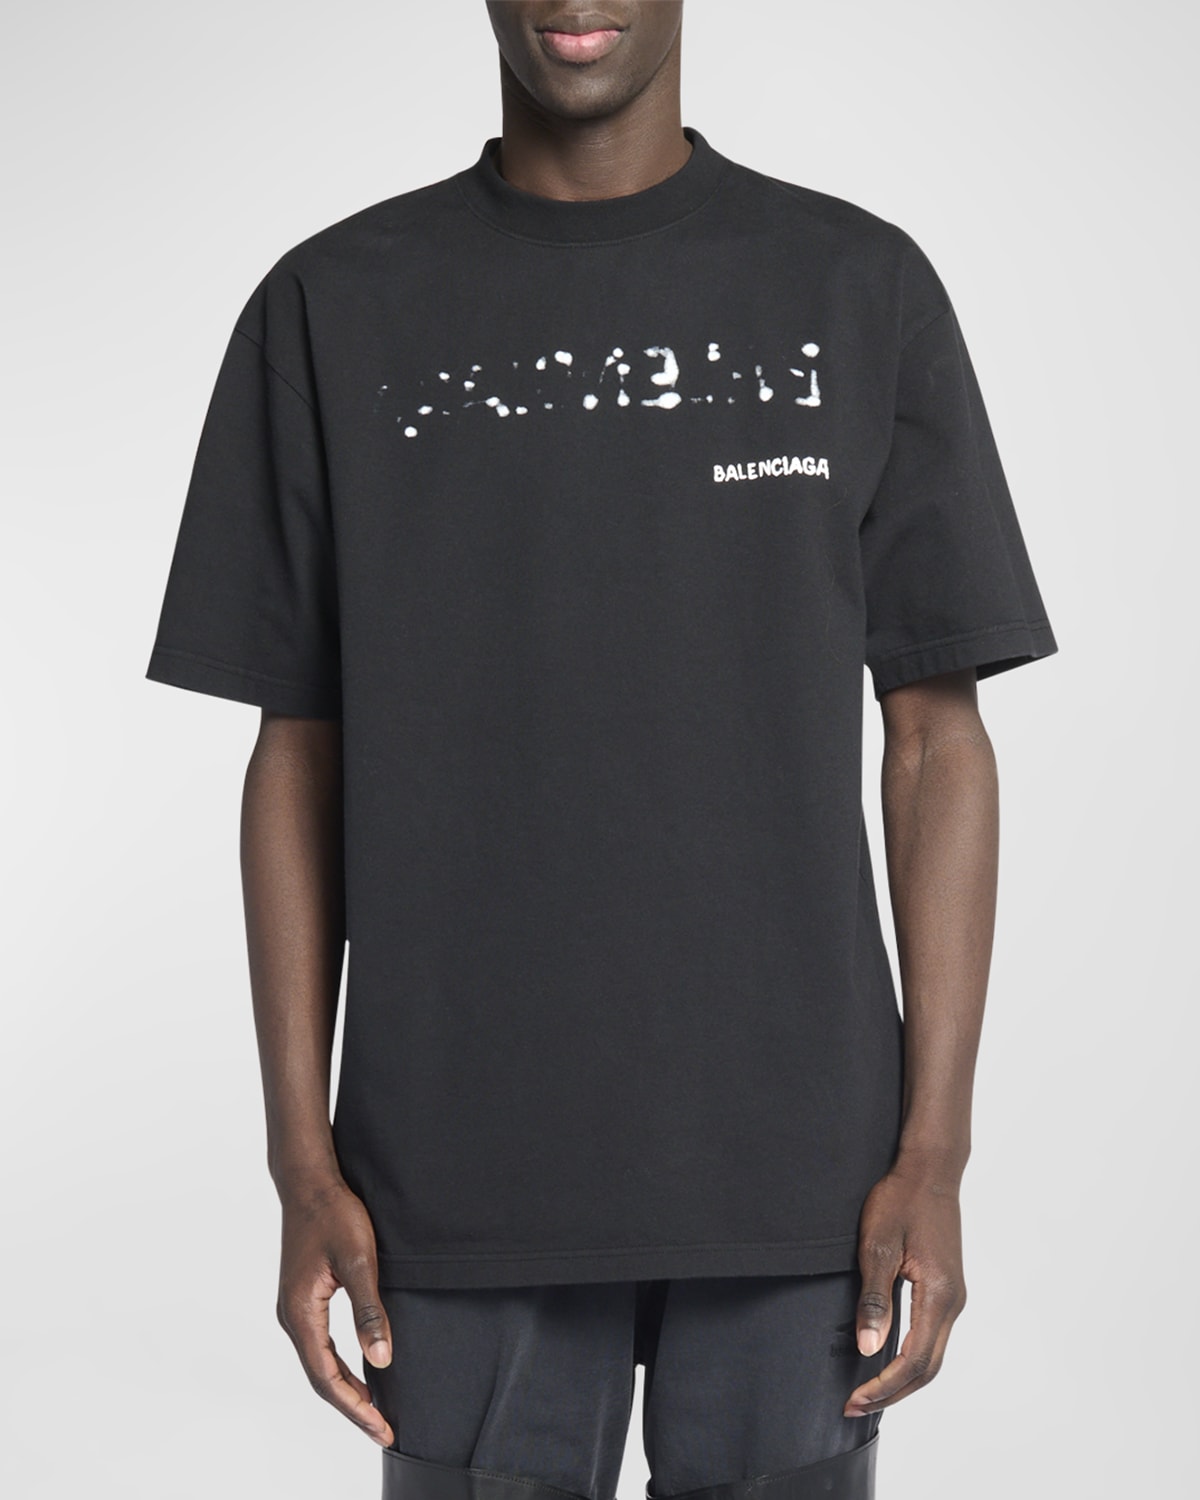 Balenciaga T-shirt  Large Fit In Black Wh